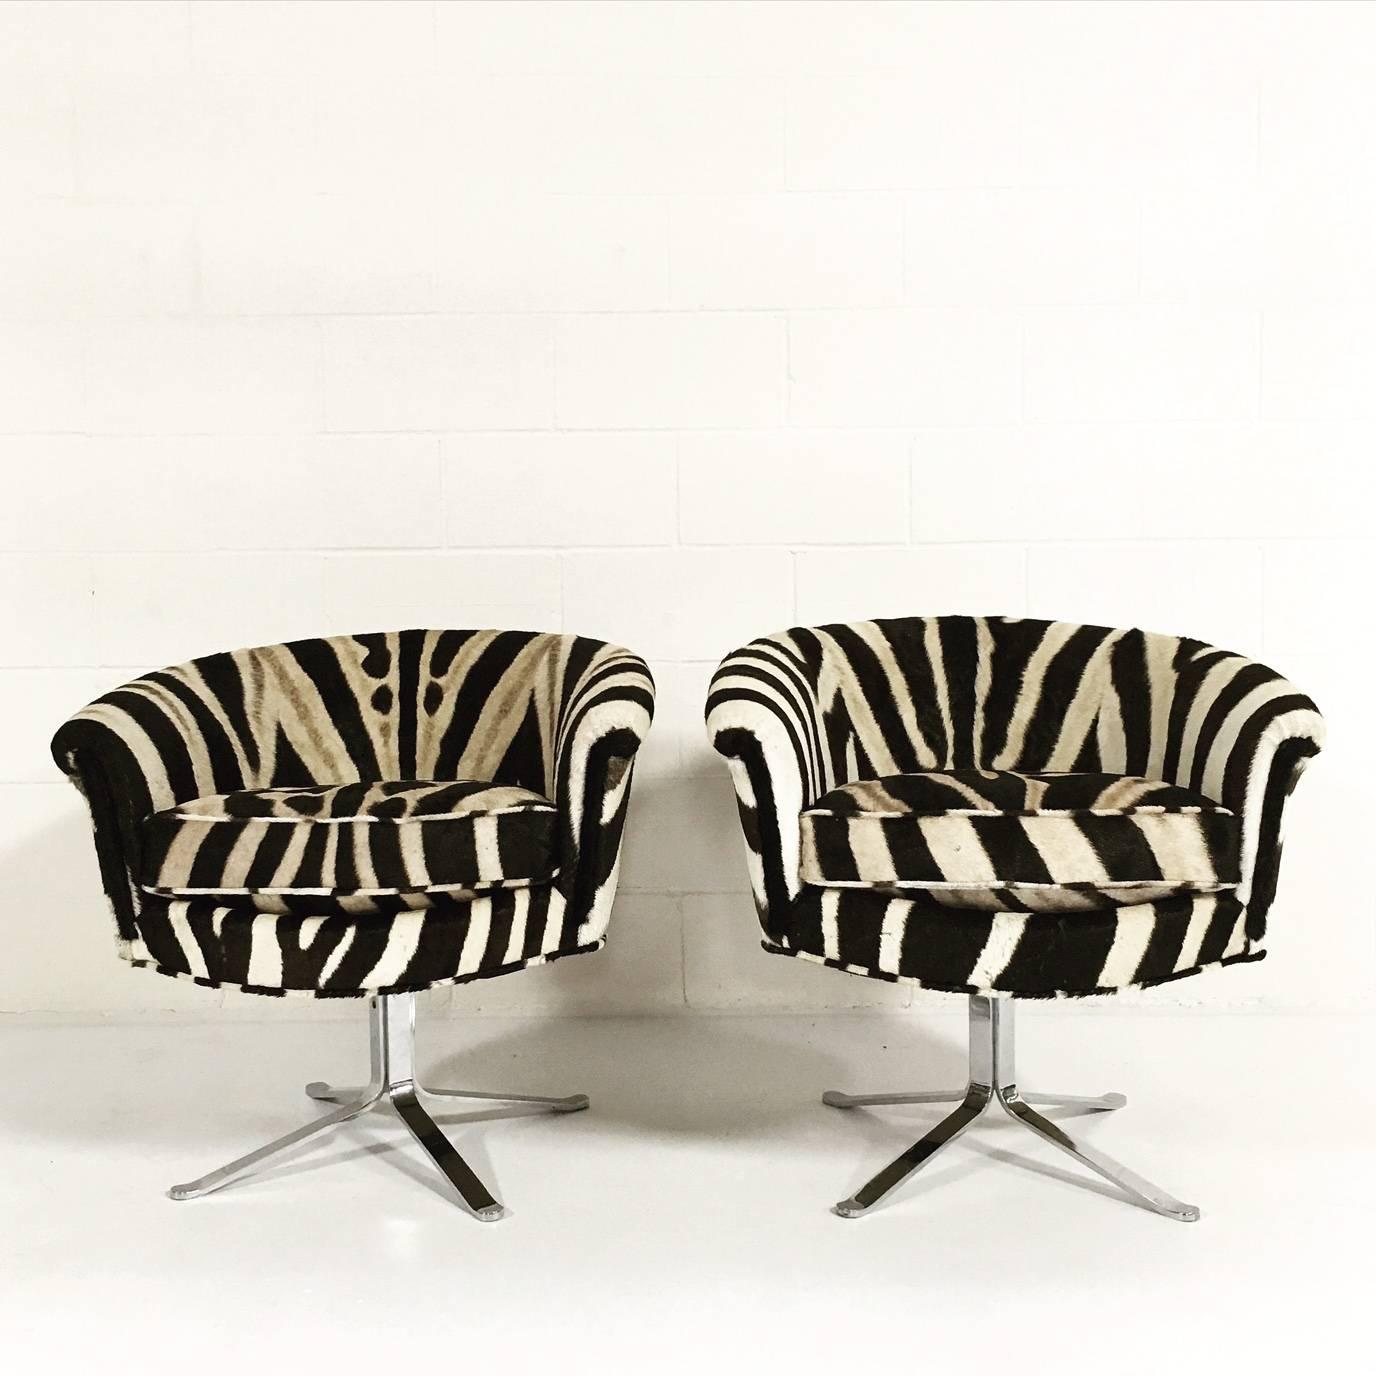 So comfortable, so cool. For office or home, this pair of swivel bucket chairs is irresistibly chic. Masterfully upholstered in zebra hide on a four-star chrome base. By Pace, in the manner of I.M. Rosen